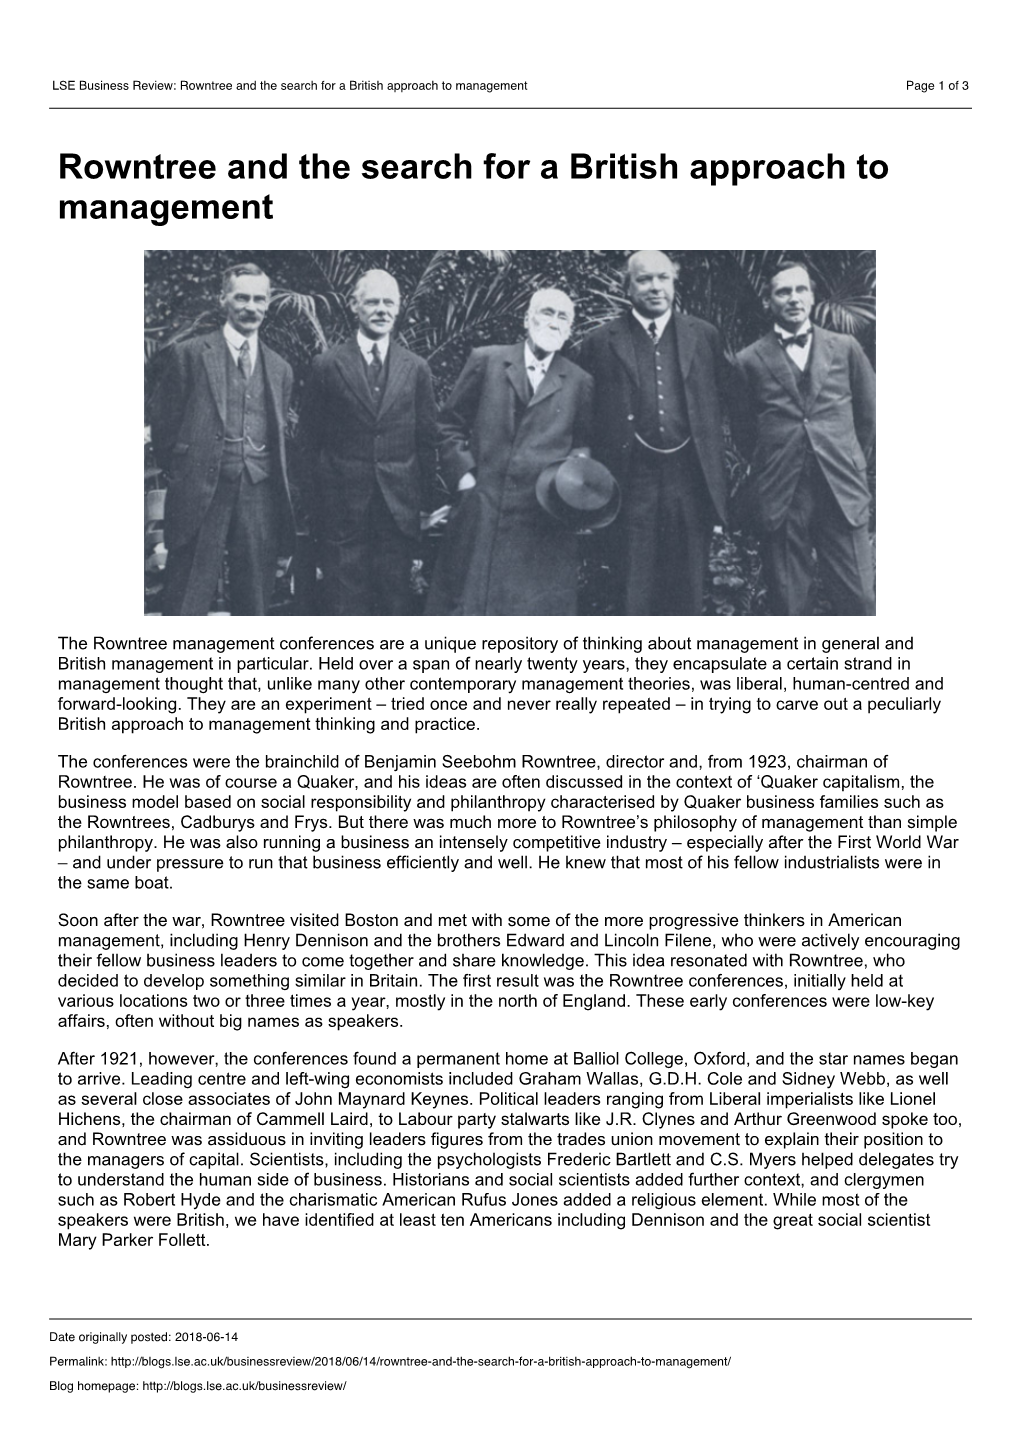 Rowntree and the Search for a British Approach to Management Page 1 of 3